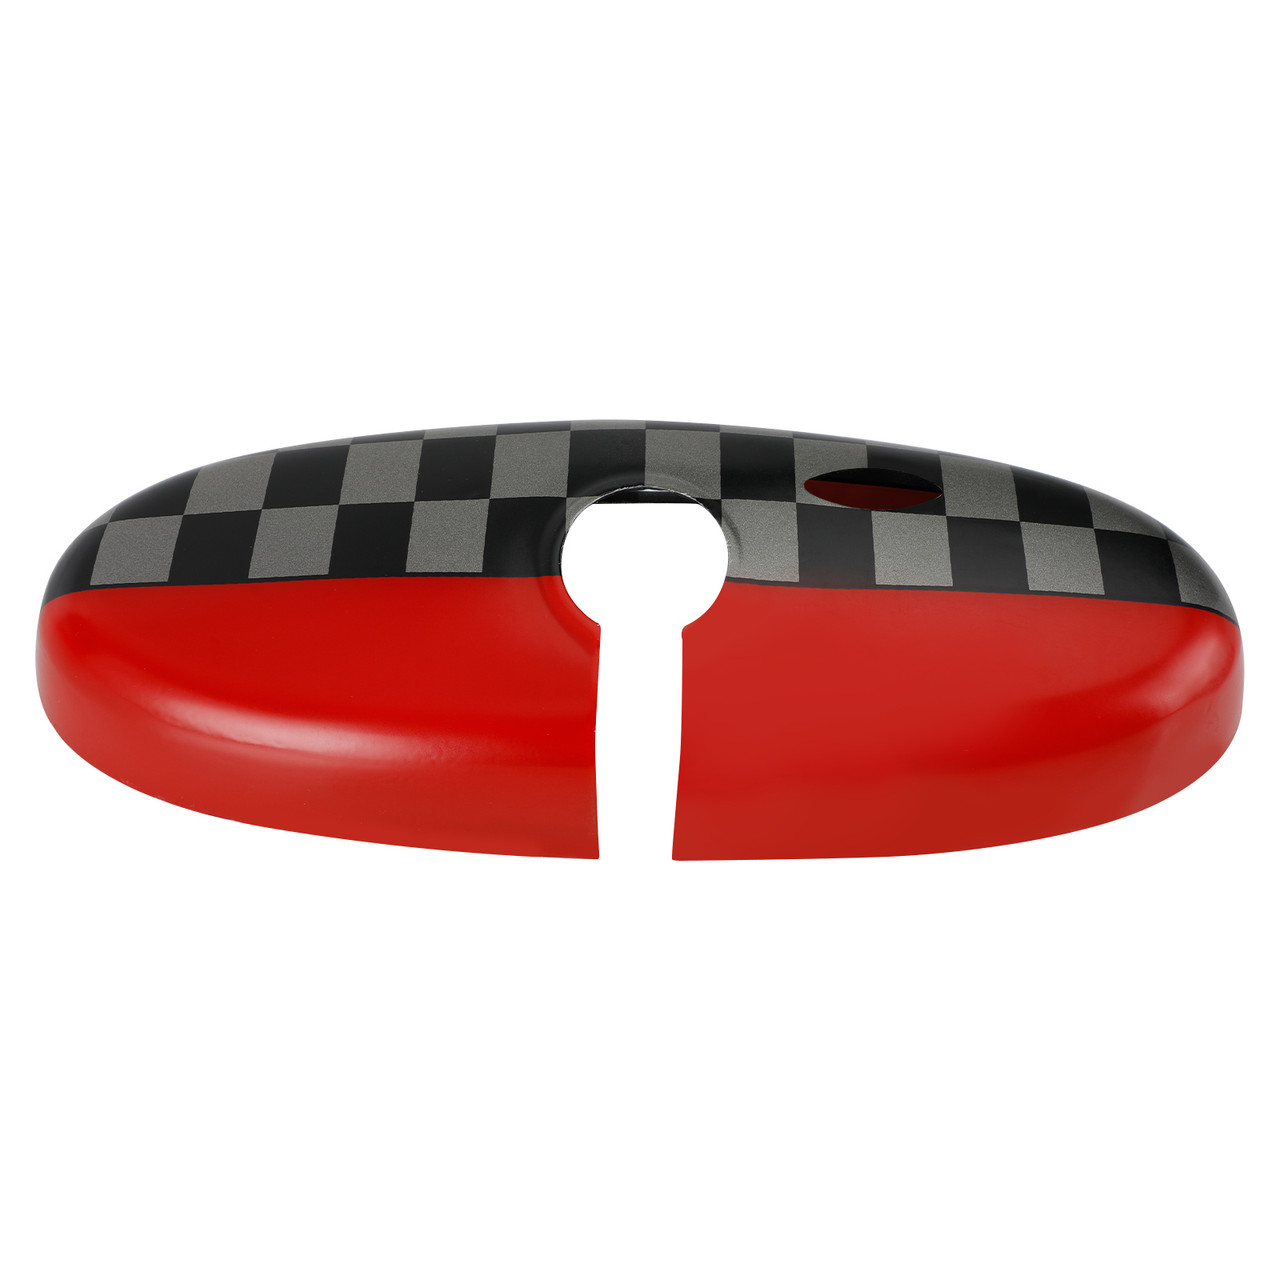 Black/Grey Checkered Red Rear View Mirror Cover Fit For BMW MINI Cooper R55 R56 R57